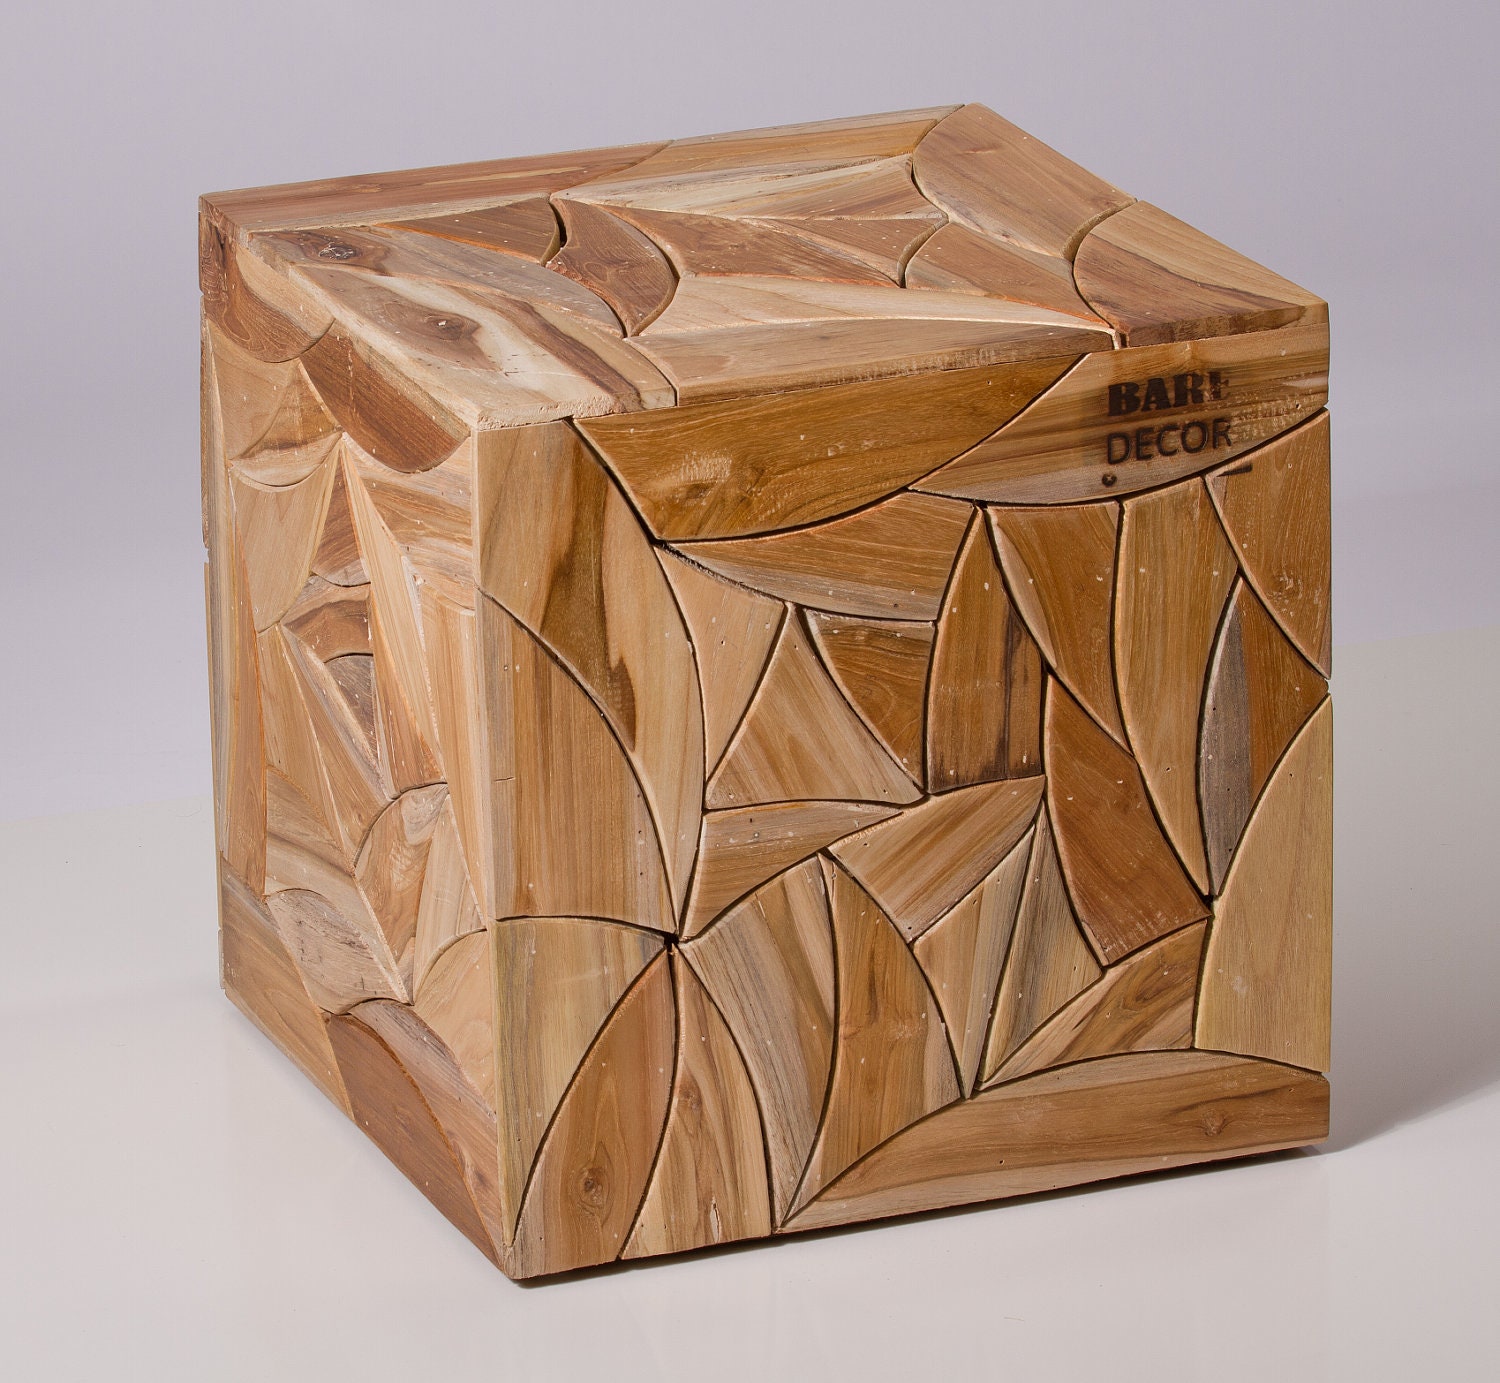 Picasso Cube Table in Teak Wood FREE SHIPPING - BareDecor